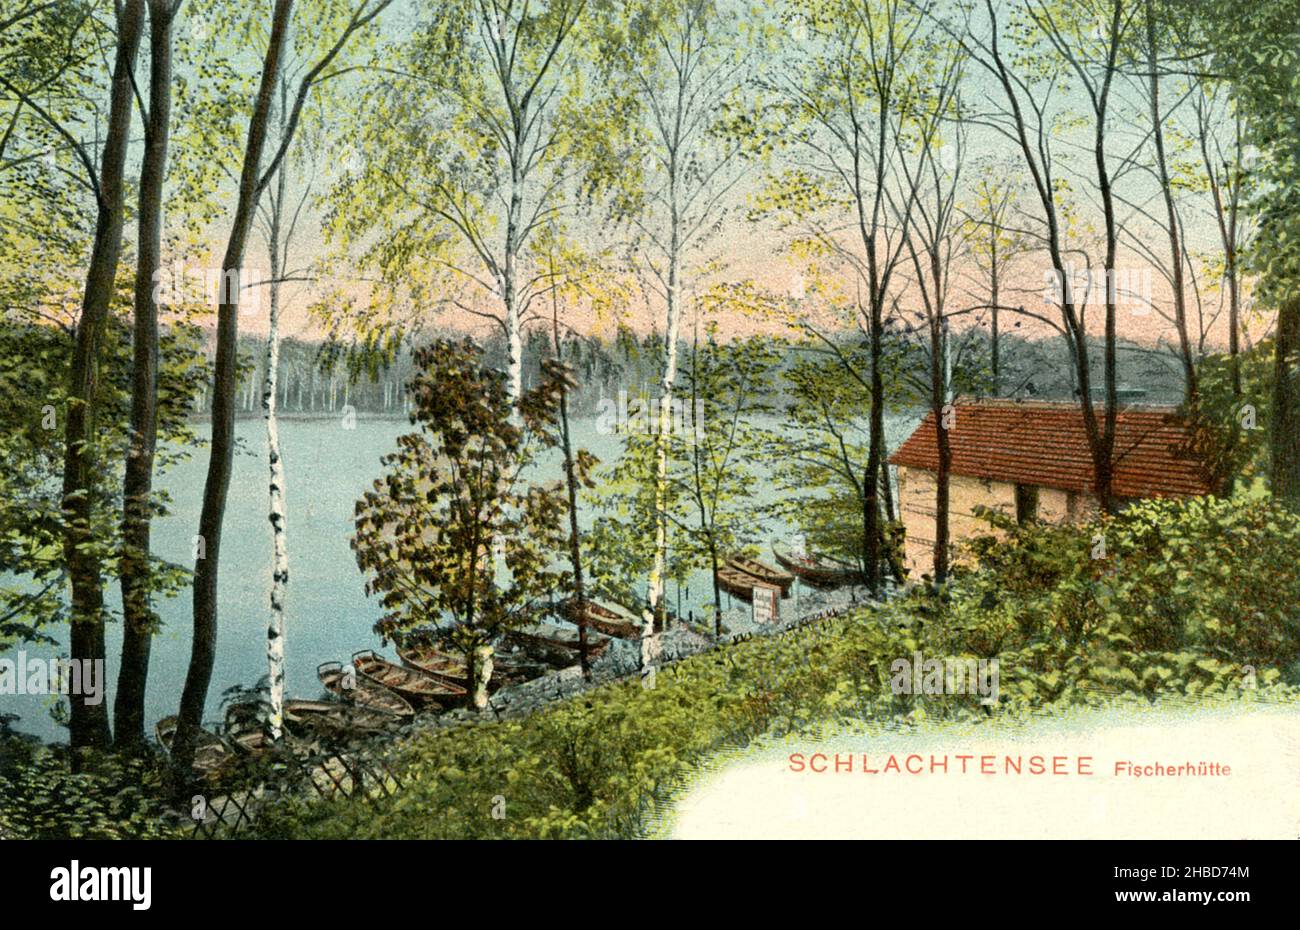 Berlin: fishing lodge at the Schlachtensee ,  (postcard, ), Berlin: Fischerhütte am Schlachtensee Stock Photo